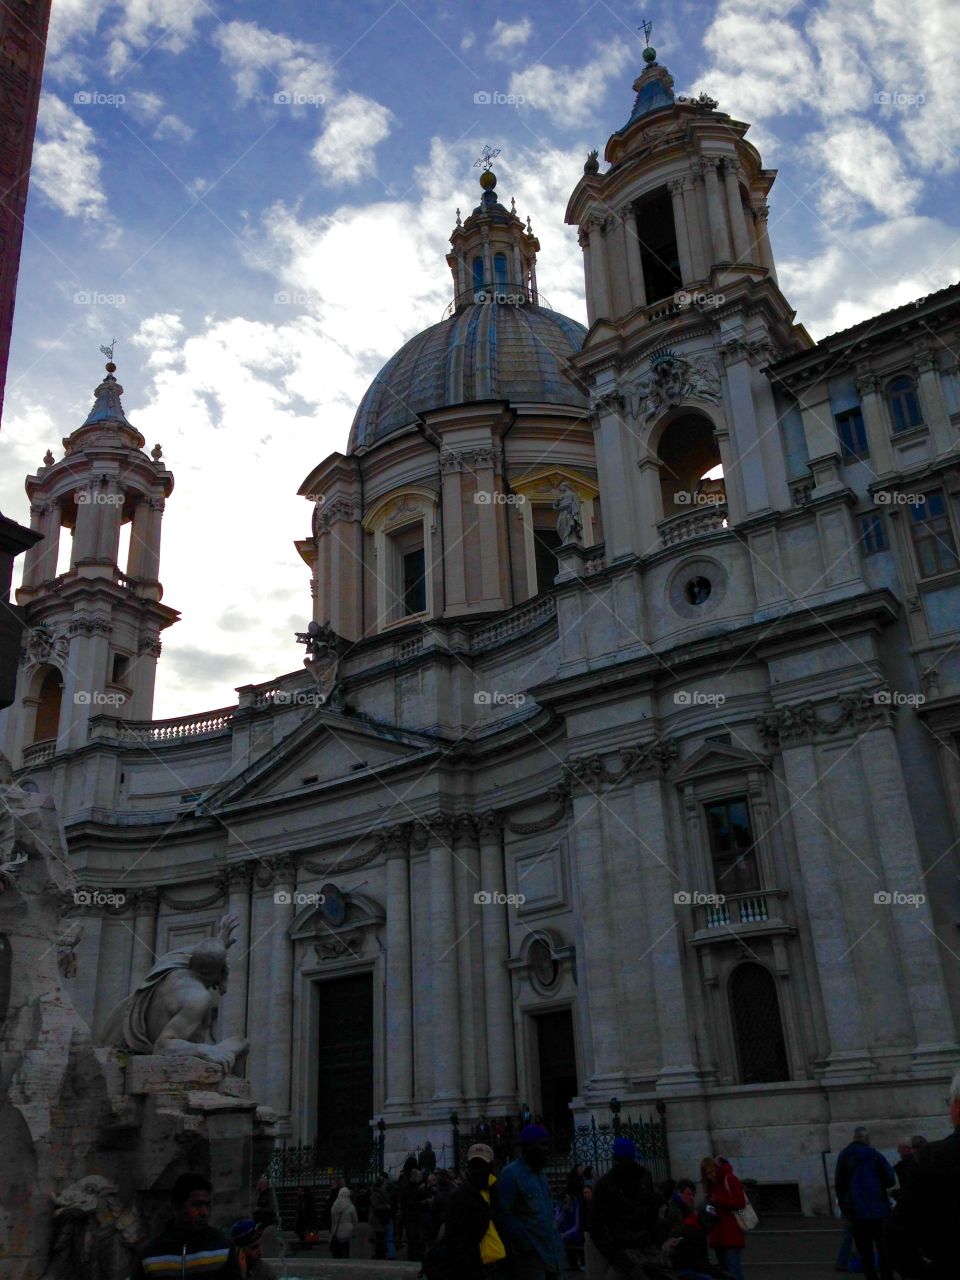 The ancient beauty oh Piazza Navona in Rome